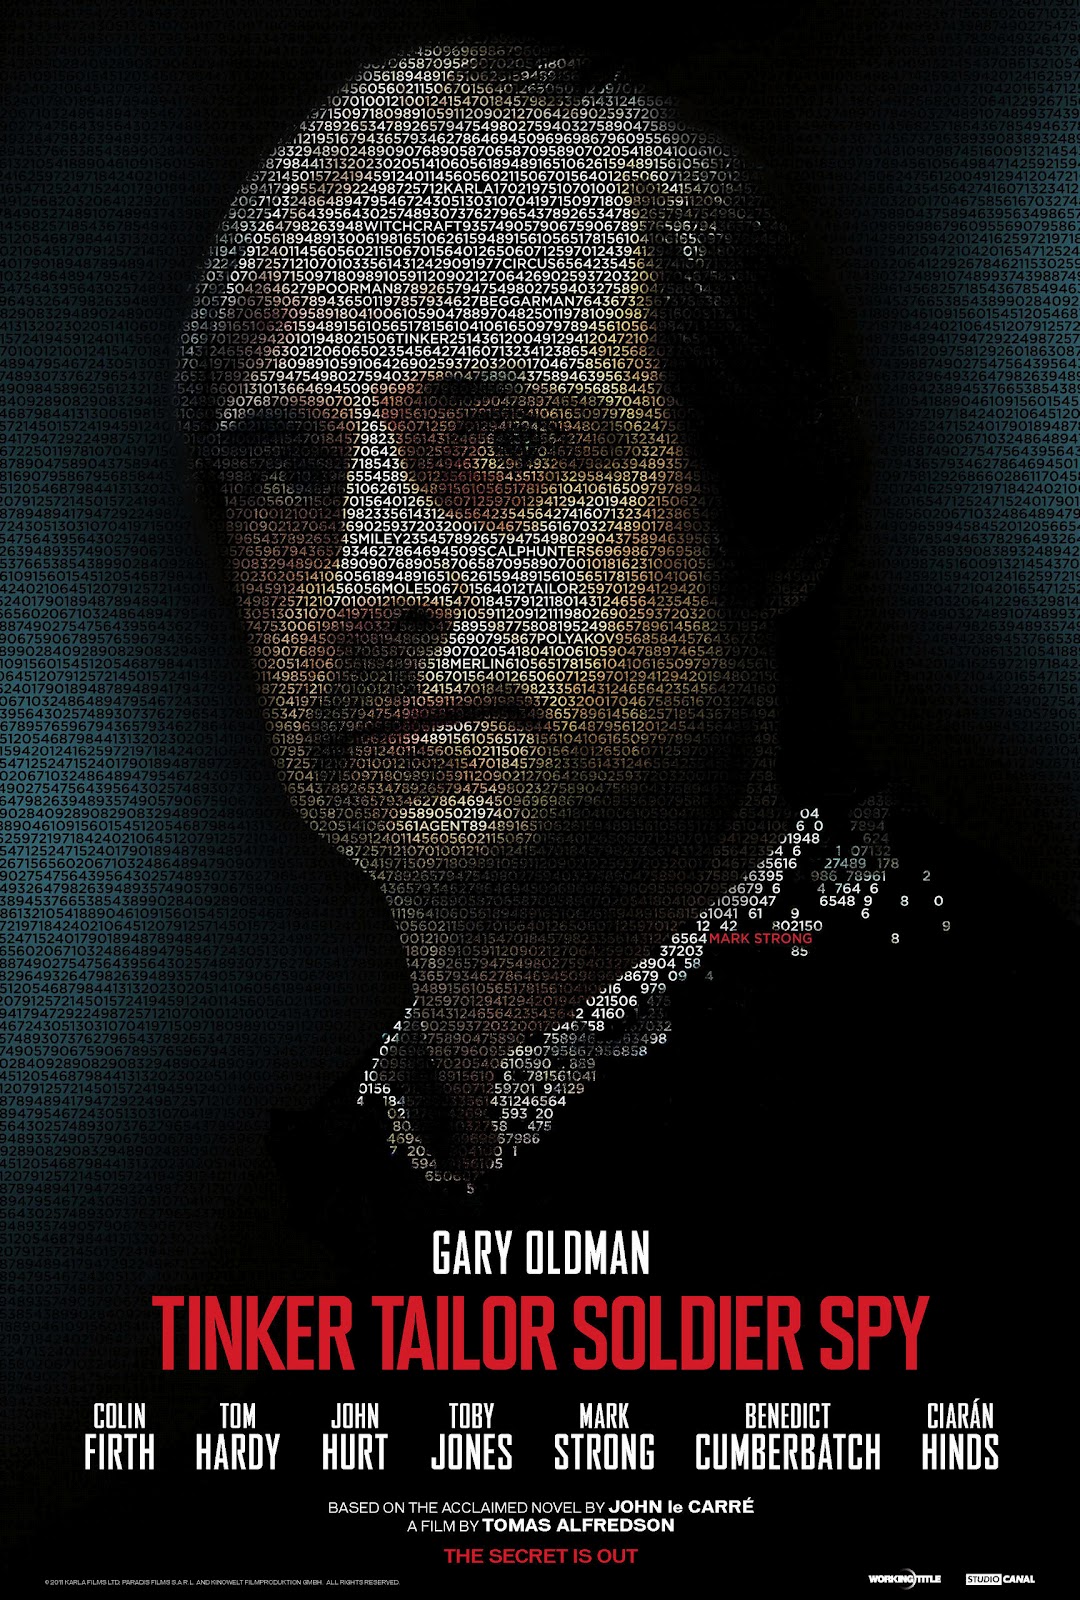 http://1.bp.blogspot.com/-vdgh8jf-w8Y/UD-le9XwMDI/AAAAAAAABEo/1pvZevuPx7Y/s1600/-Tinker-Tailor-Soldier-Spy-Poster-Mark-Strong-as-Jim-Prideaux-tinker-tailor-soldier-spy-25118181-1728-2560.jpg